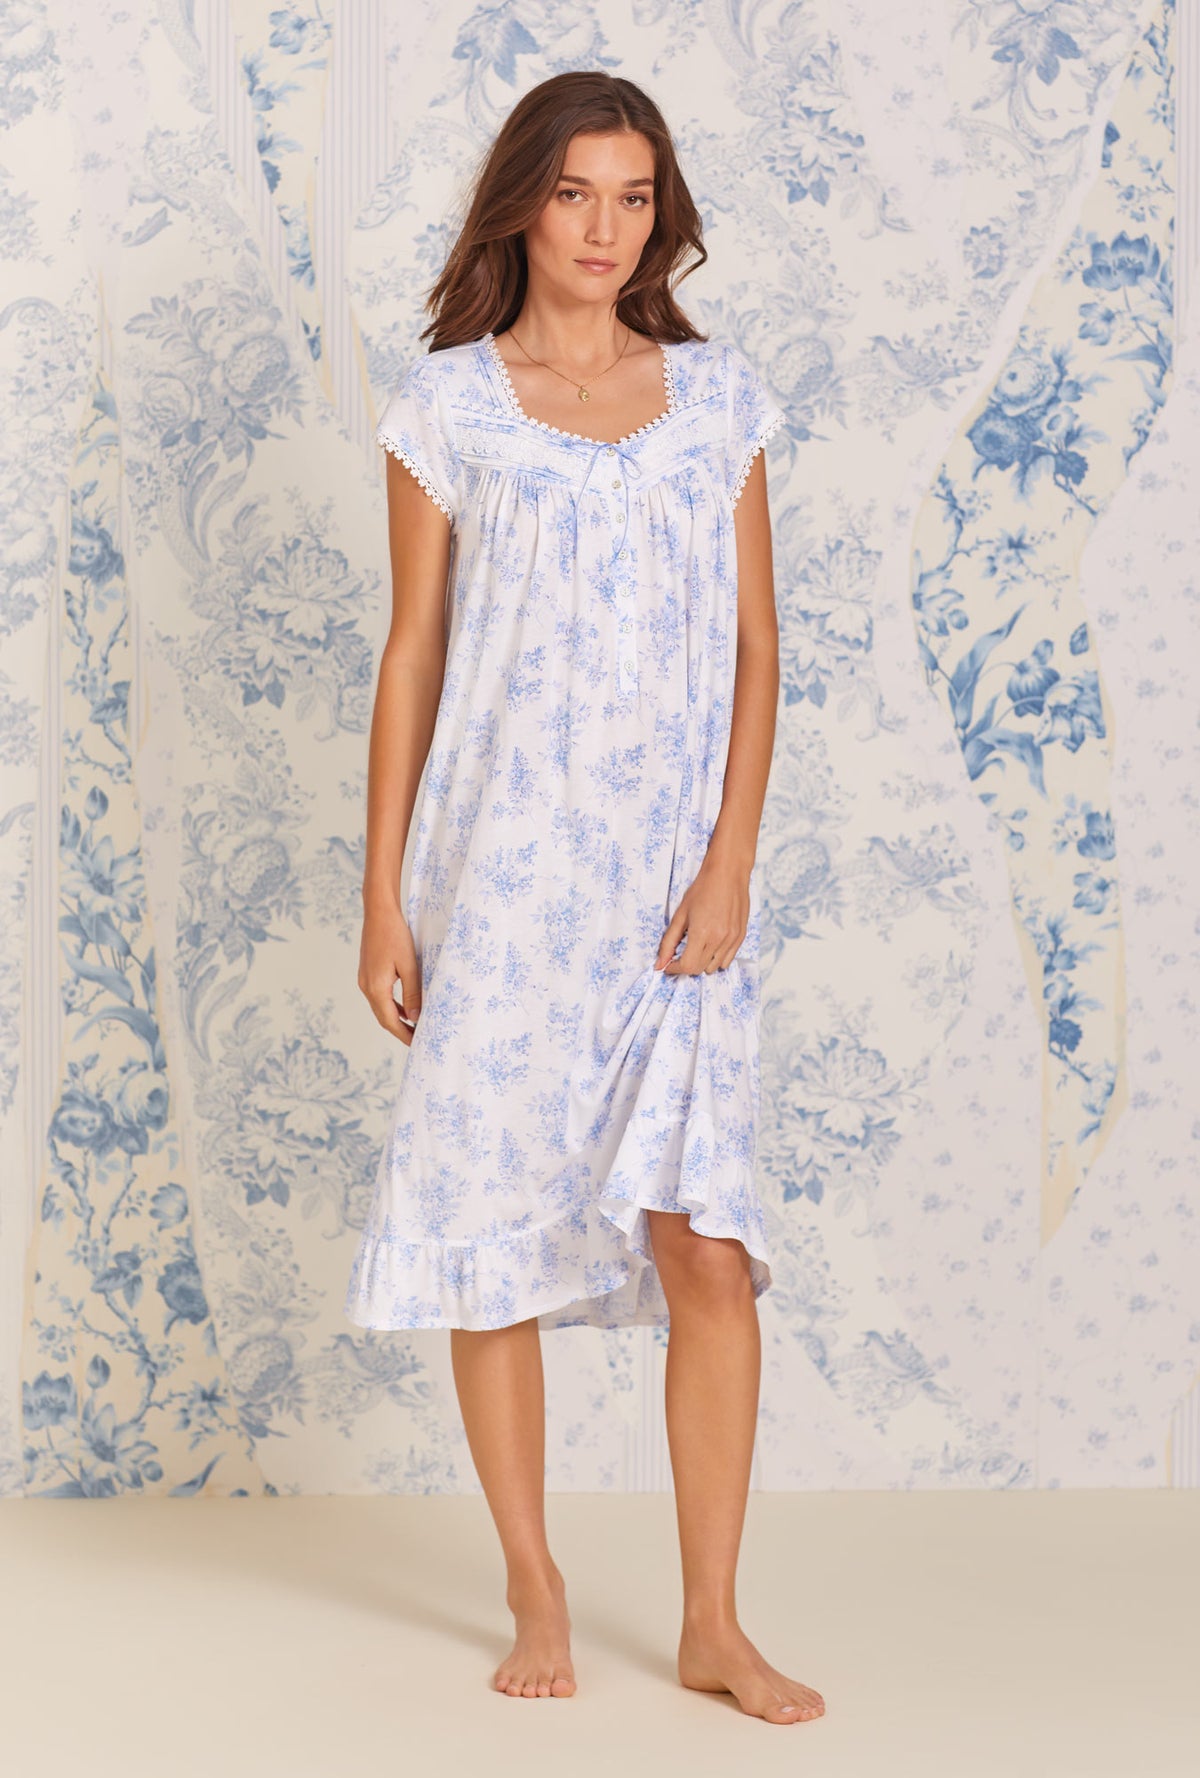 A lady wearing blue short Sleeve Nightgown with Whisper Blue Hydrangea print